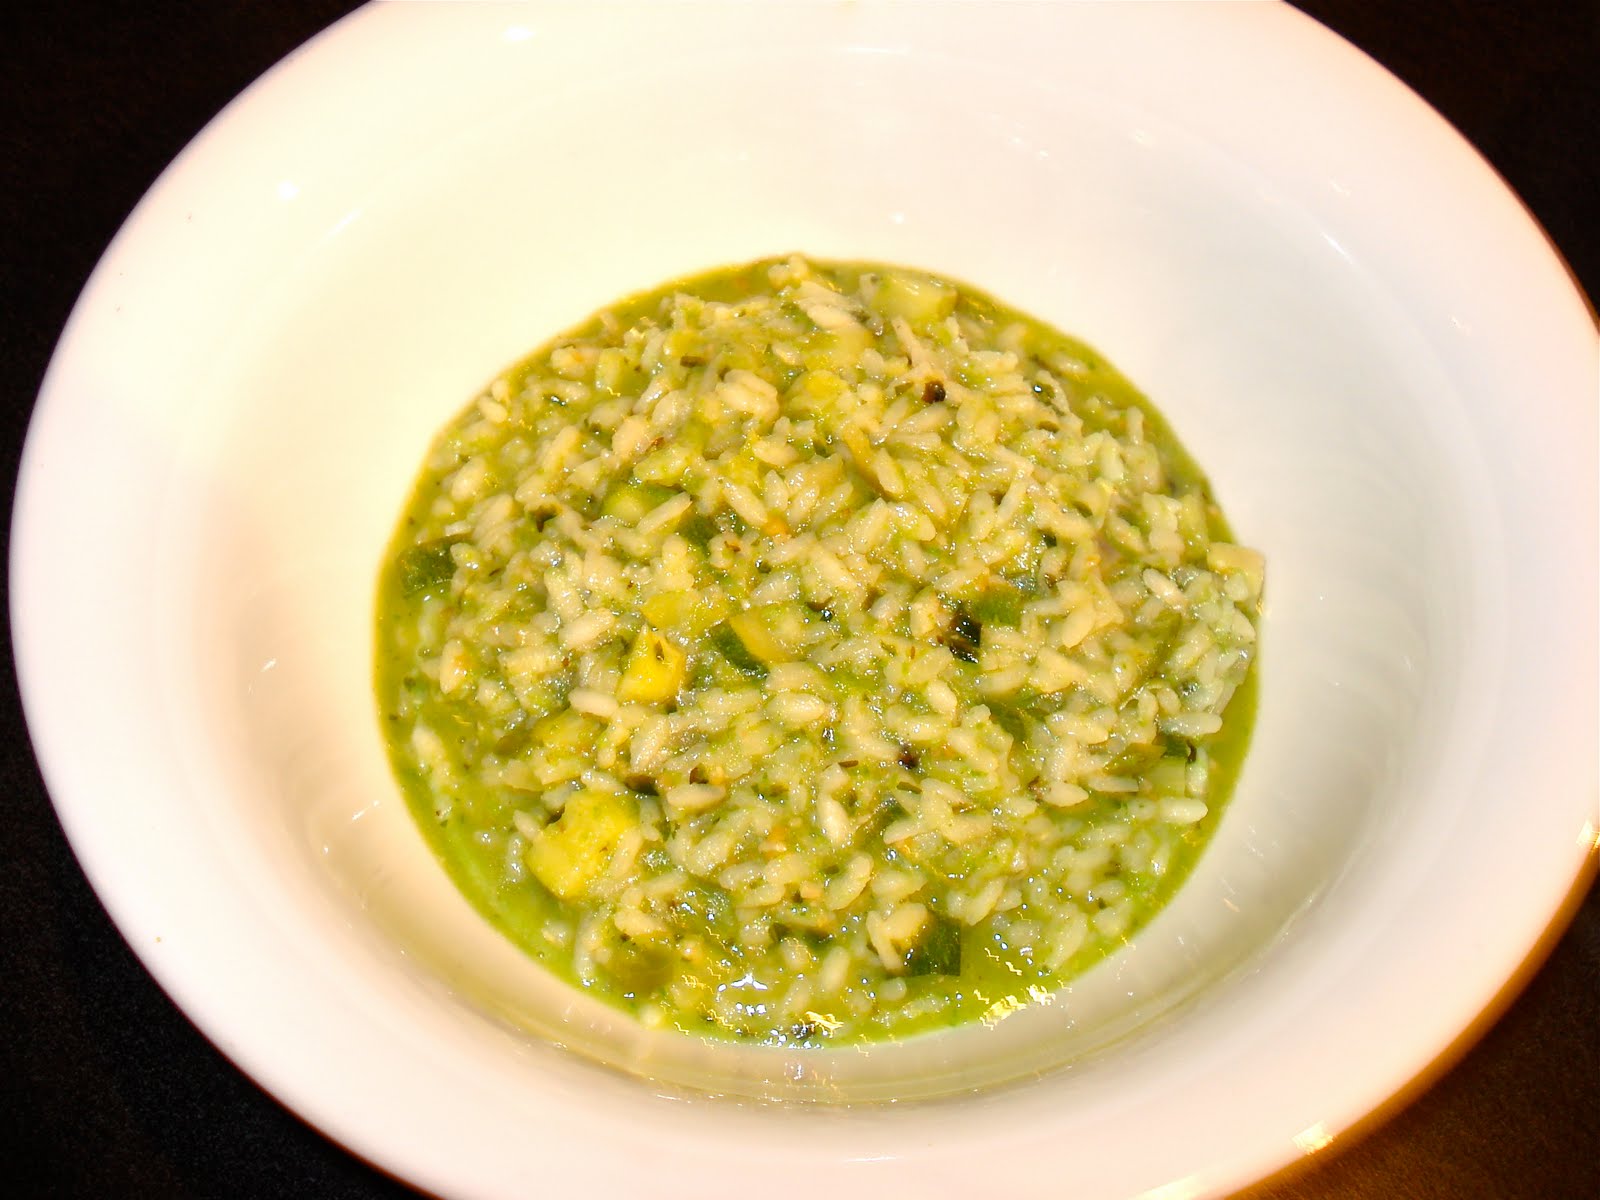 Behind The Burners: RISOTTO VERDE